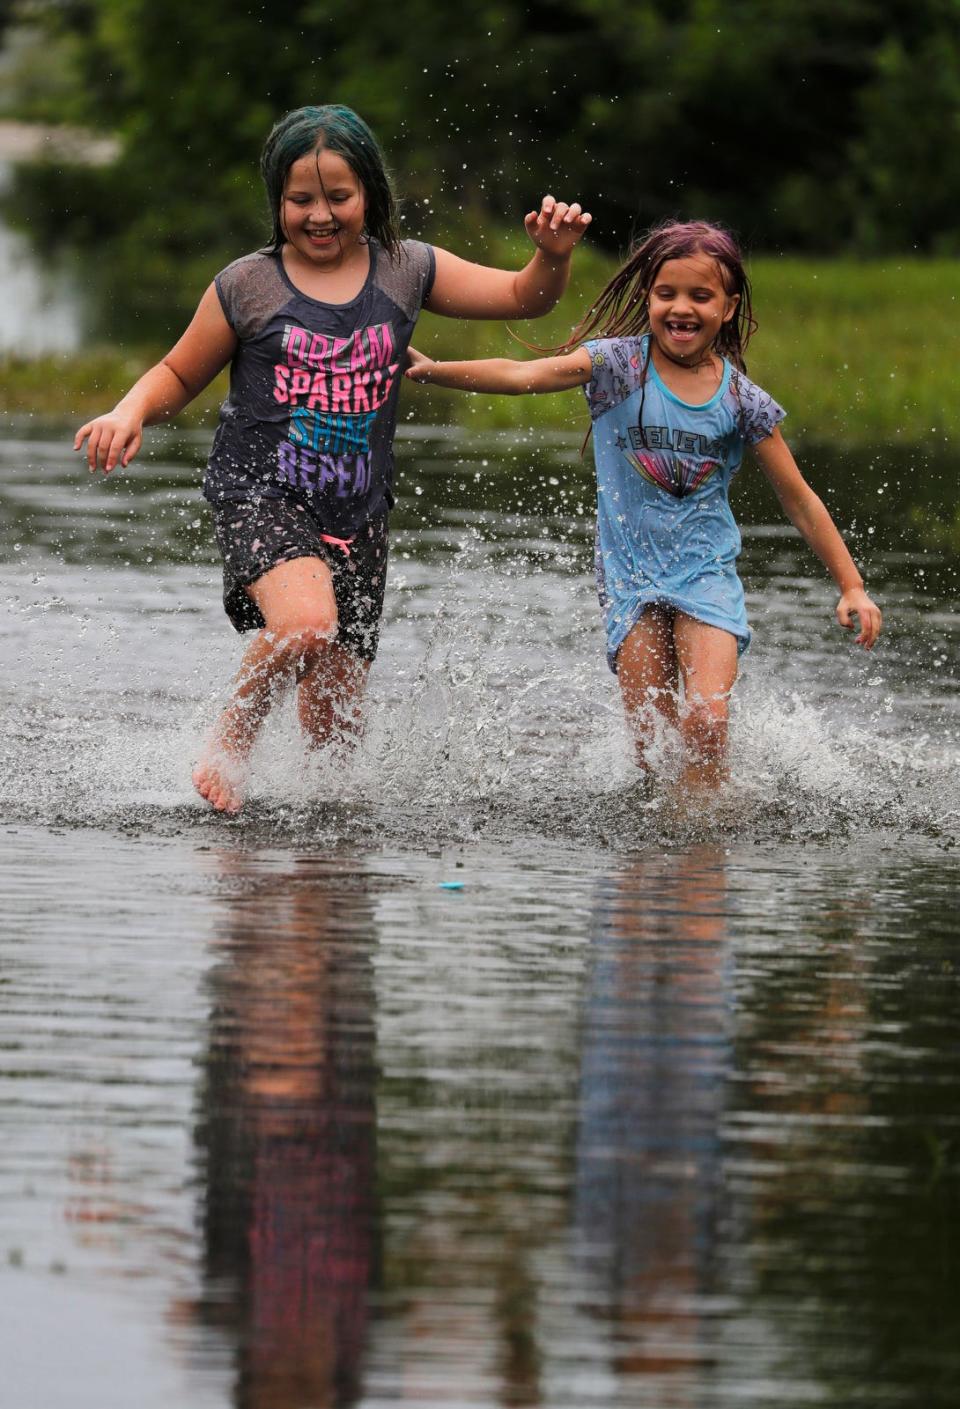 Sure, it looks like fun, but post-storm floodwater can hide a variety of hazards, and it's best to stay out of it if possible,